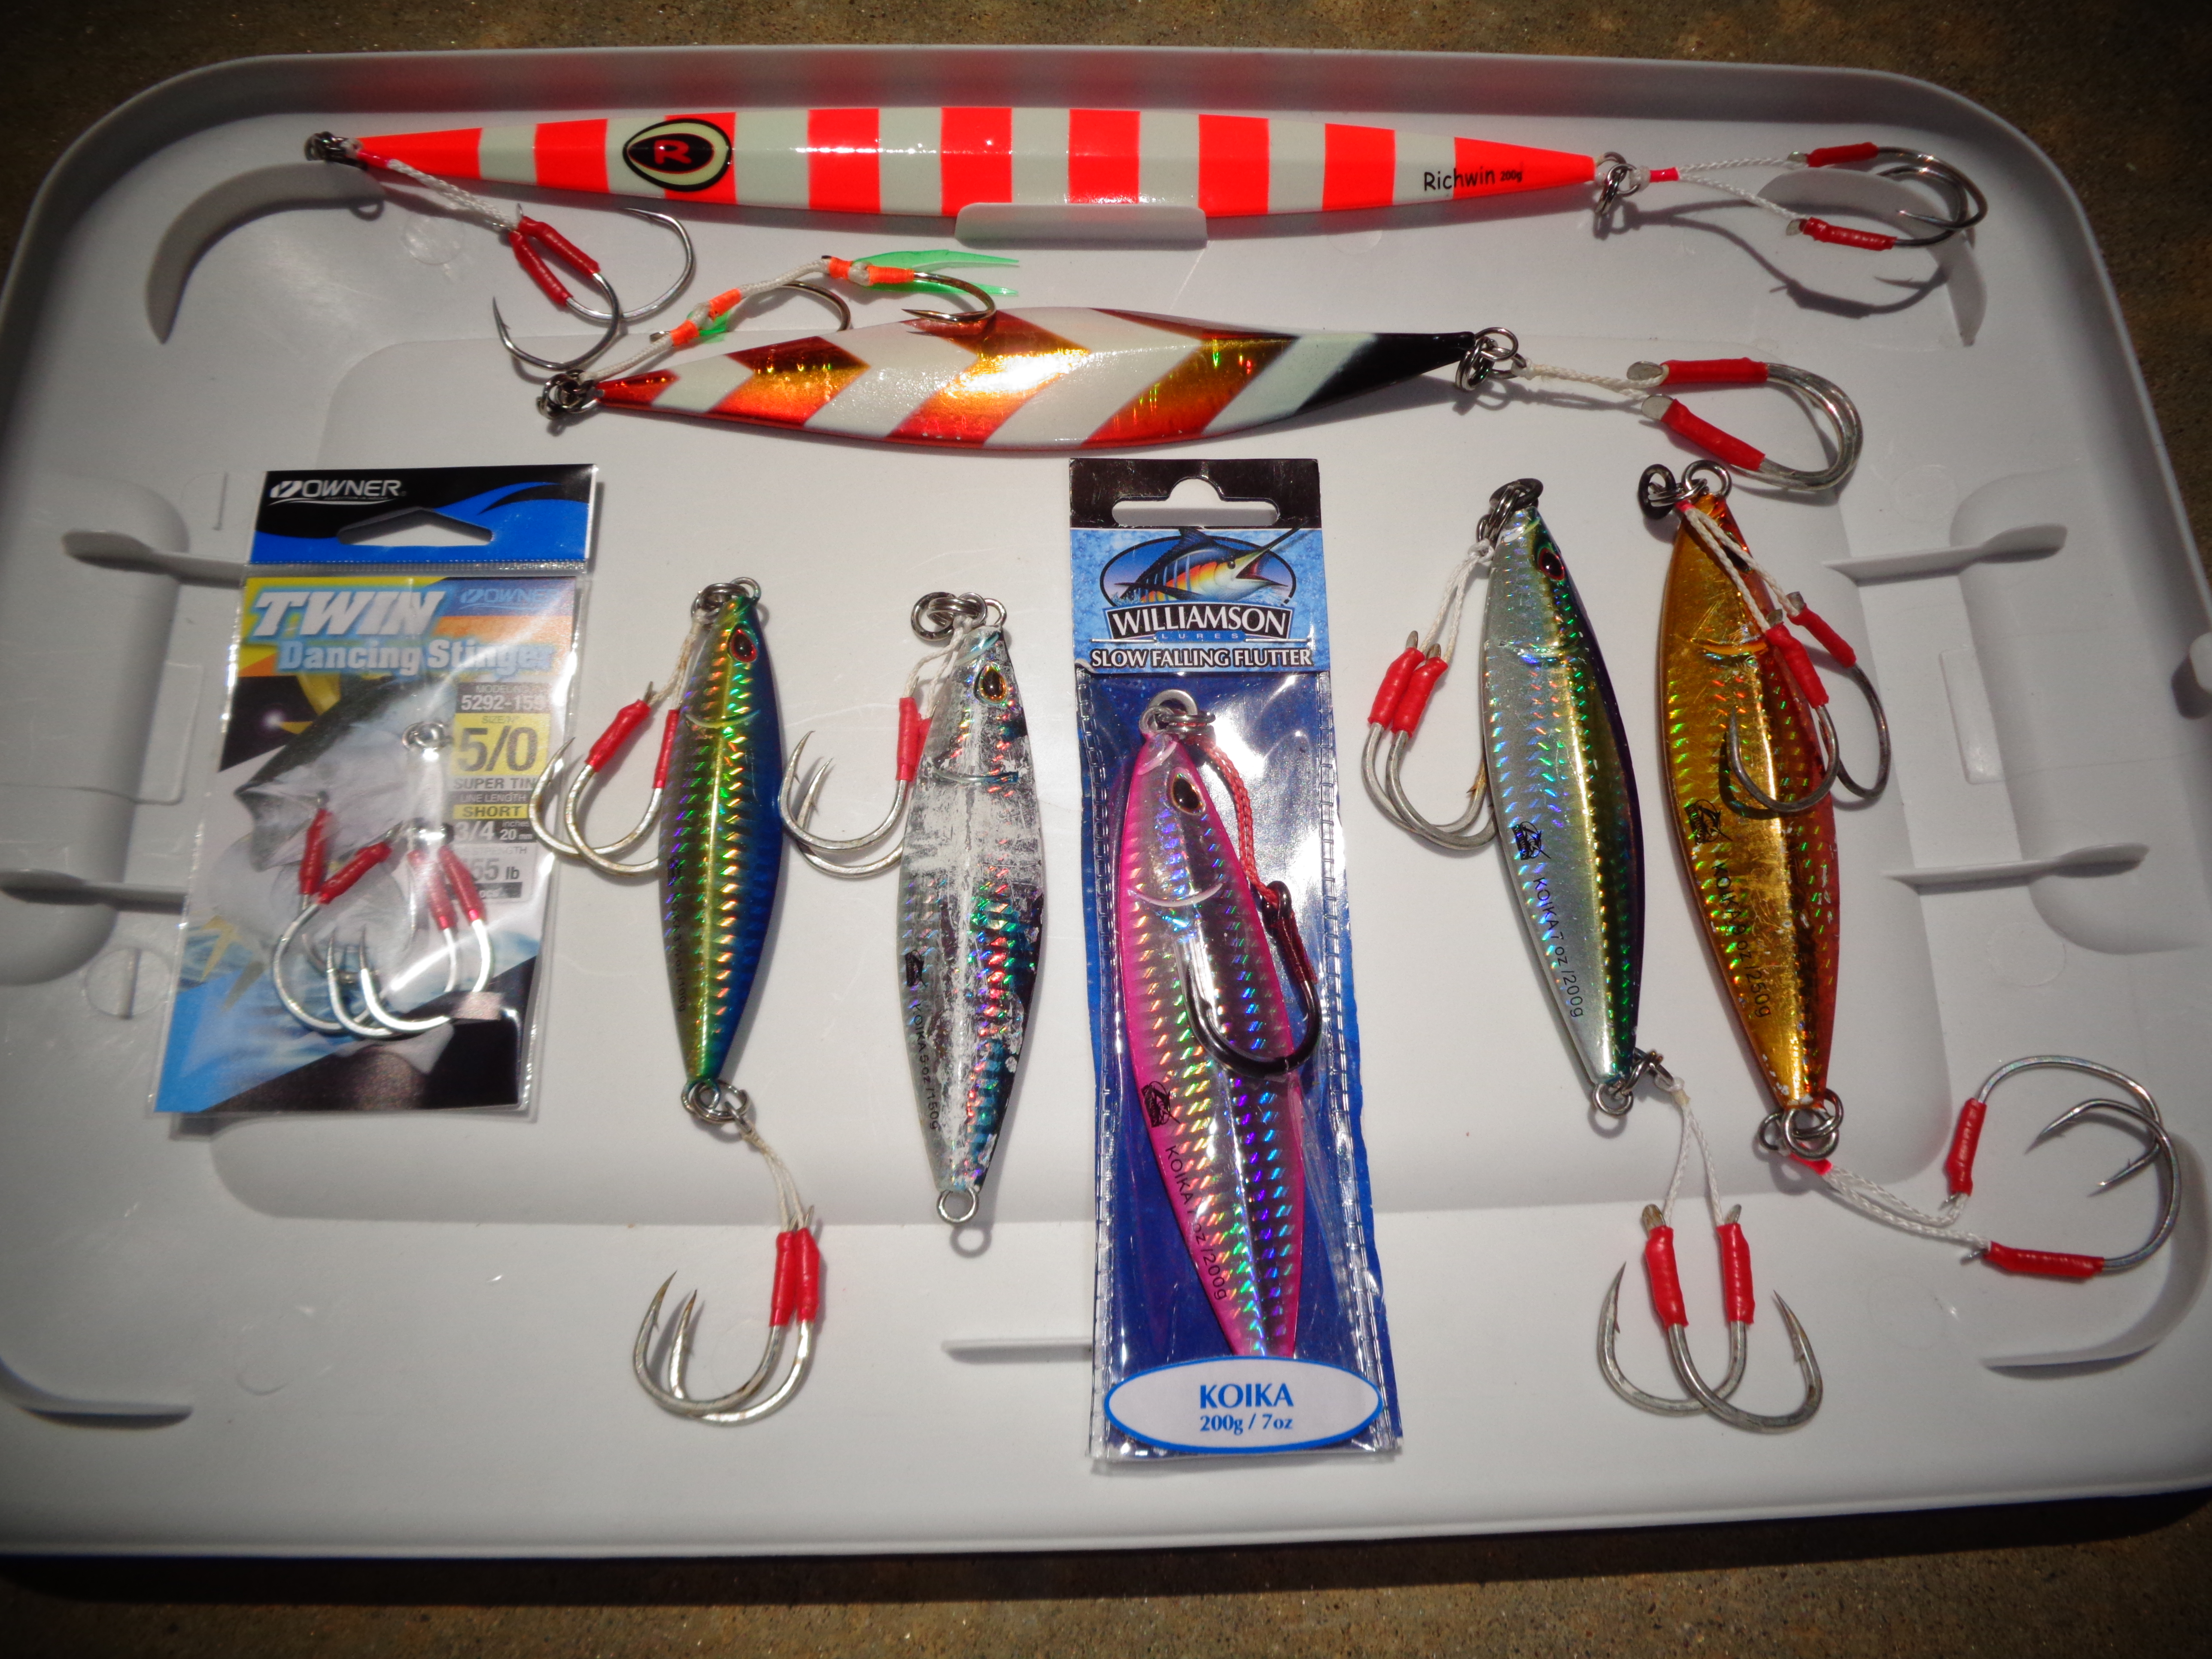 Slow pitch jigging: a new way to make every fish more fun